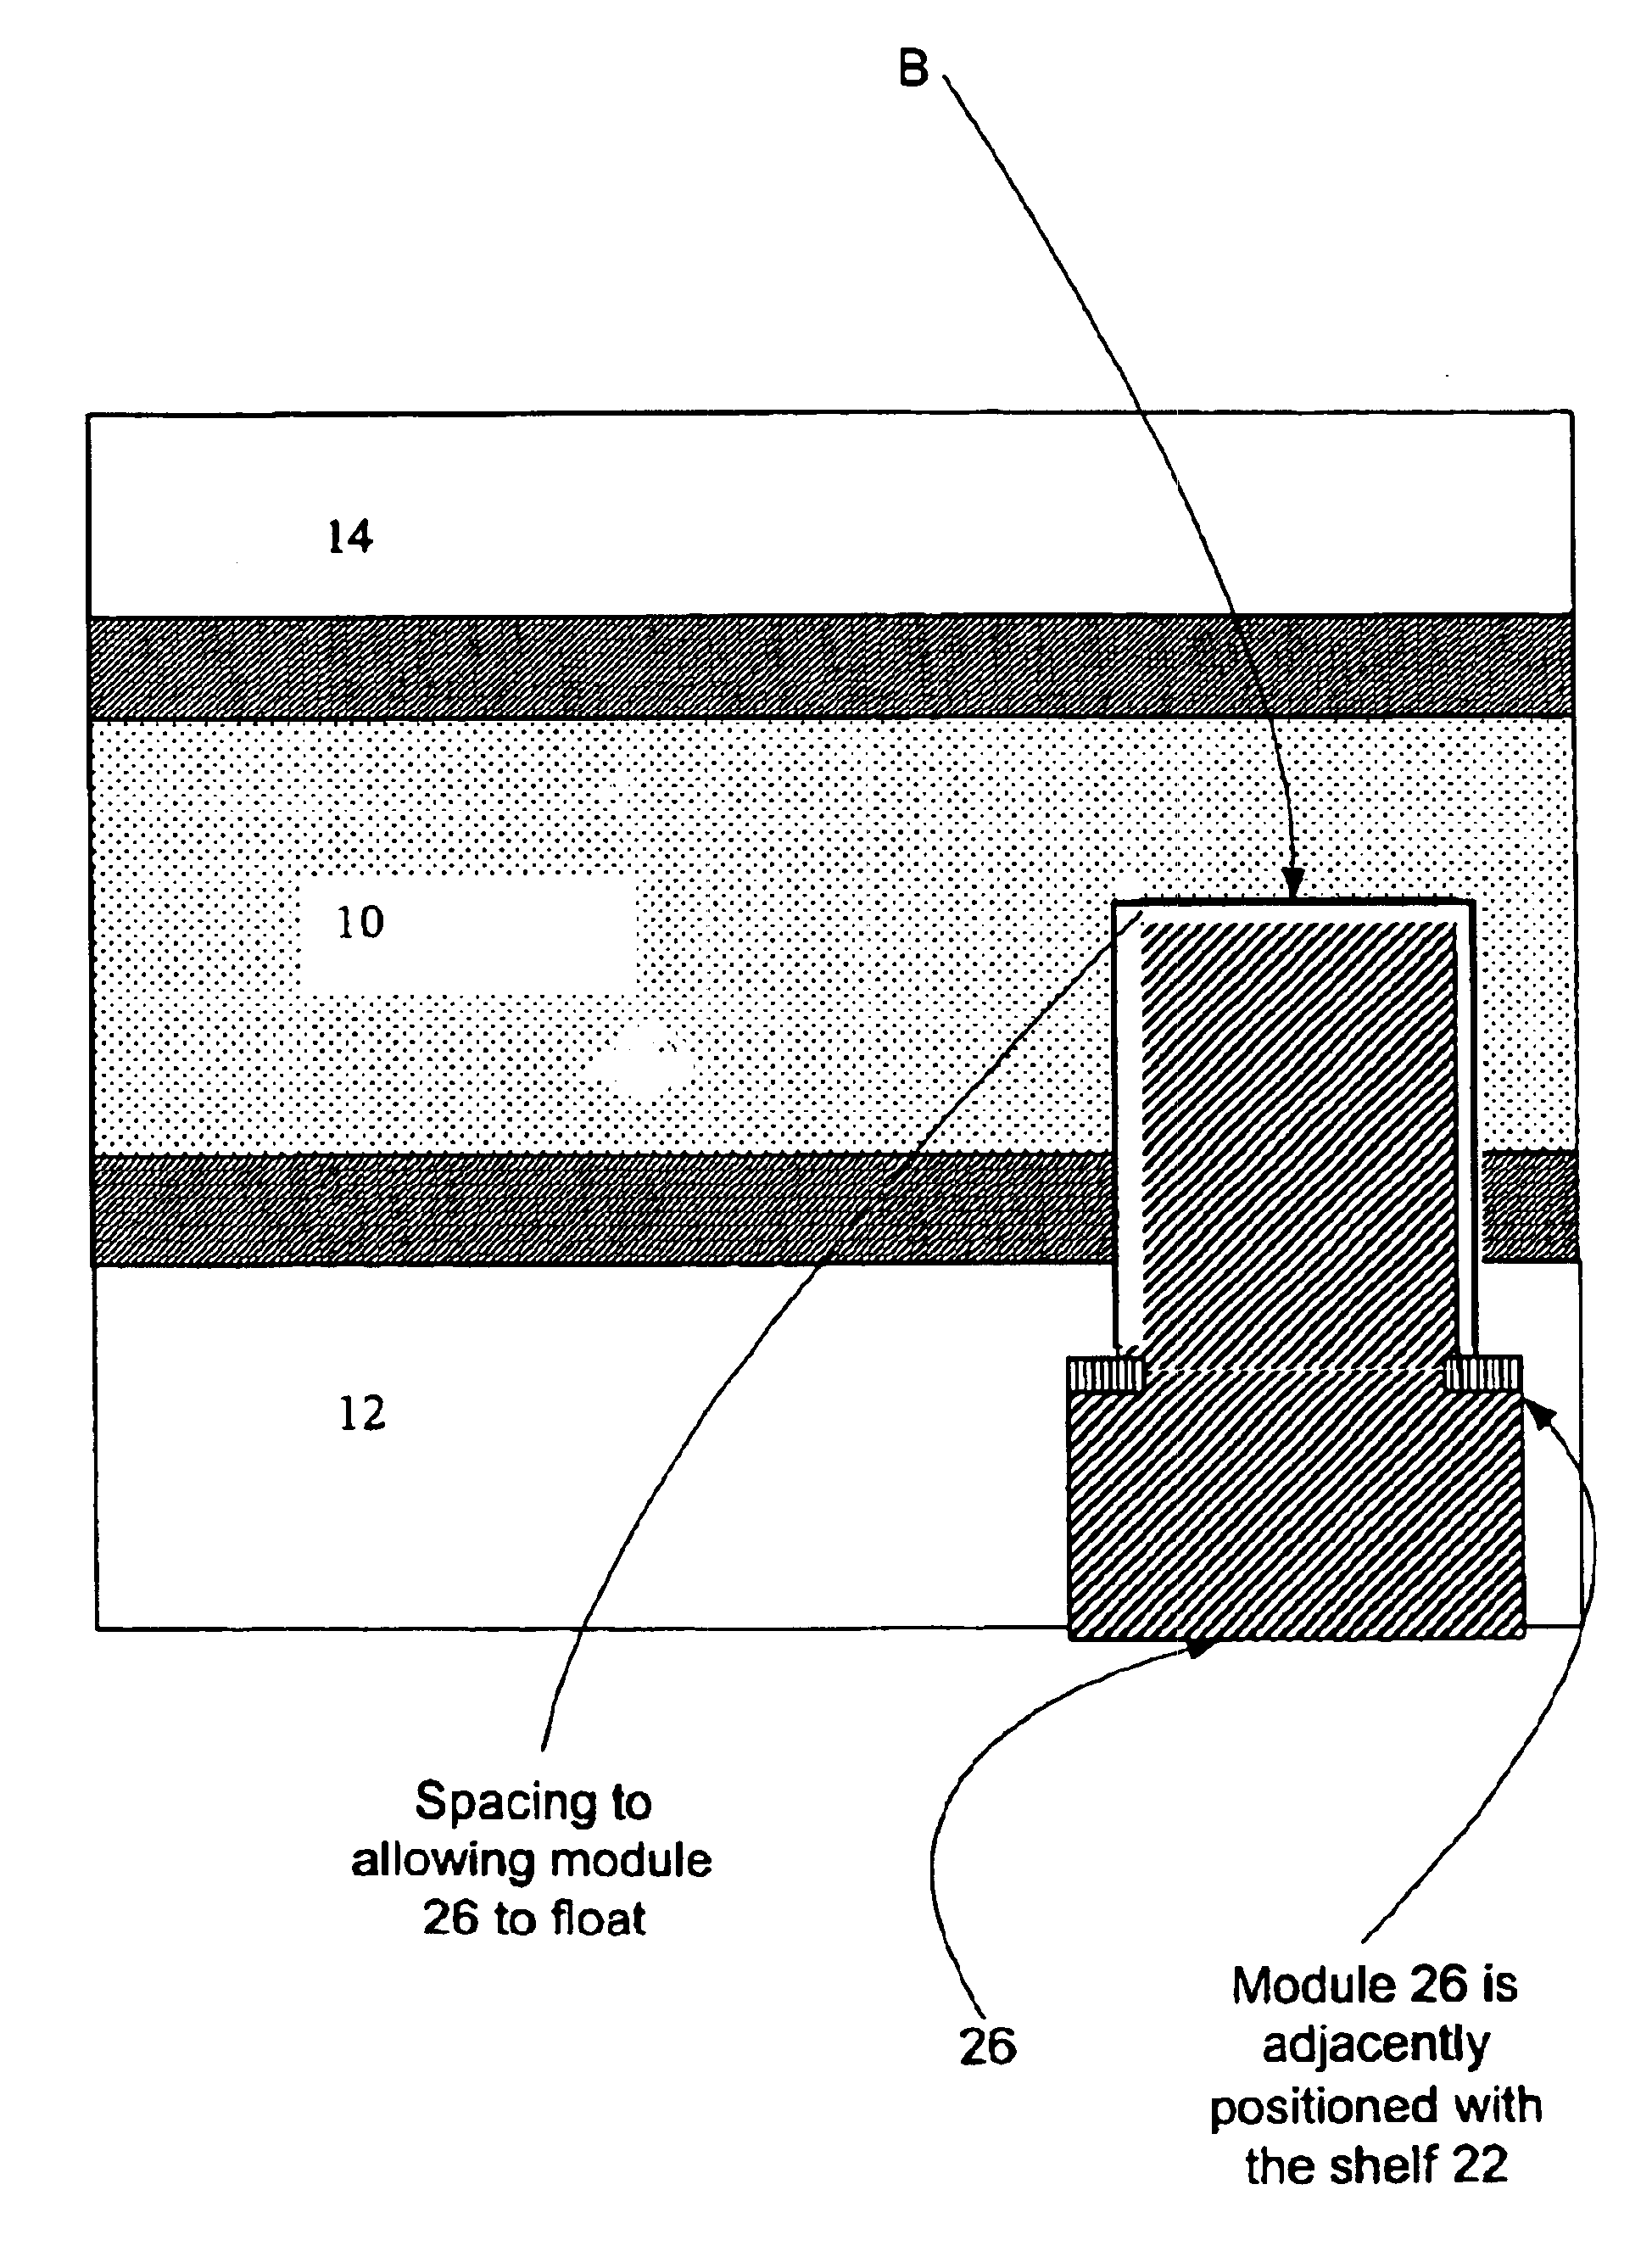 Contact smart cards having a document core, contactless smart cards including multi-layered structure, pet-based identification document, and methods of making same